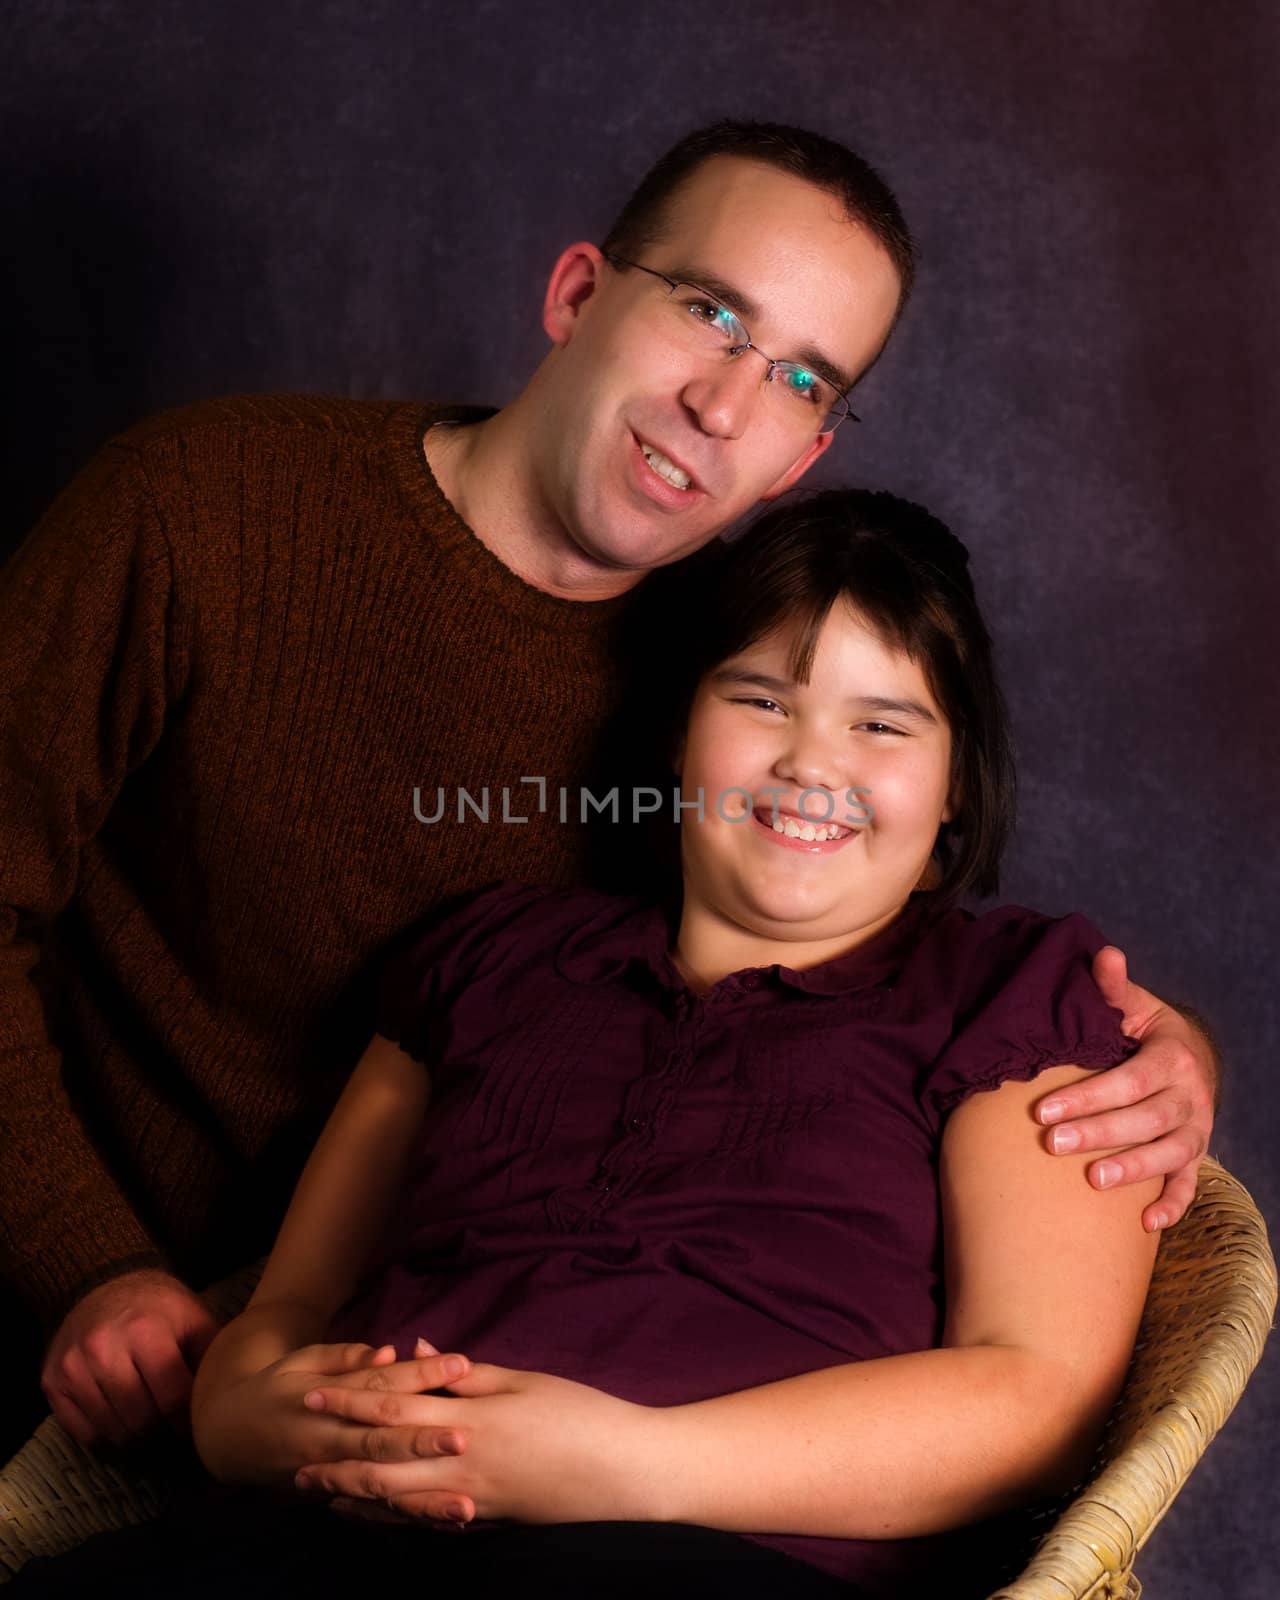 A young father and his daughter, getting their portrait done together and looking very happy